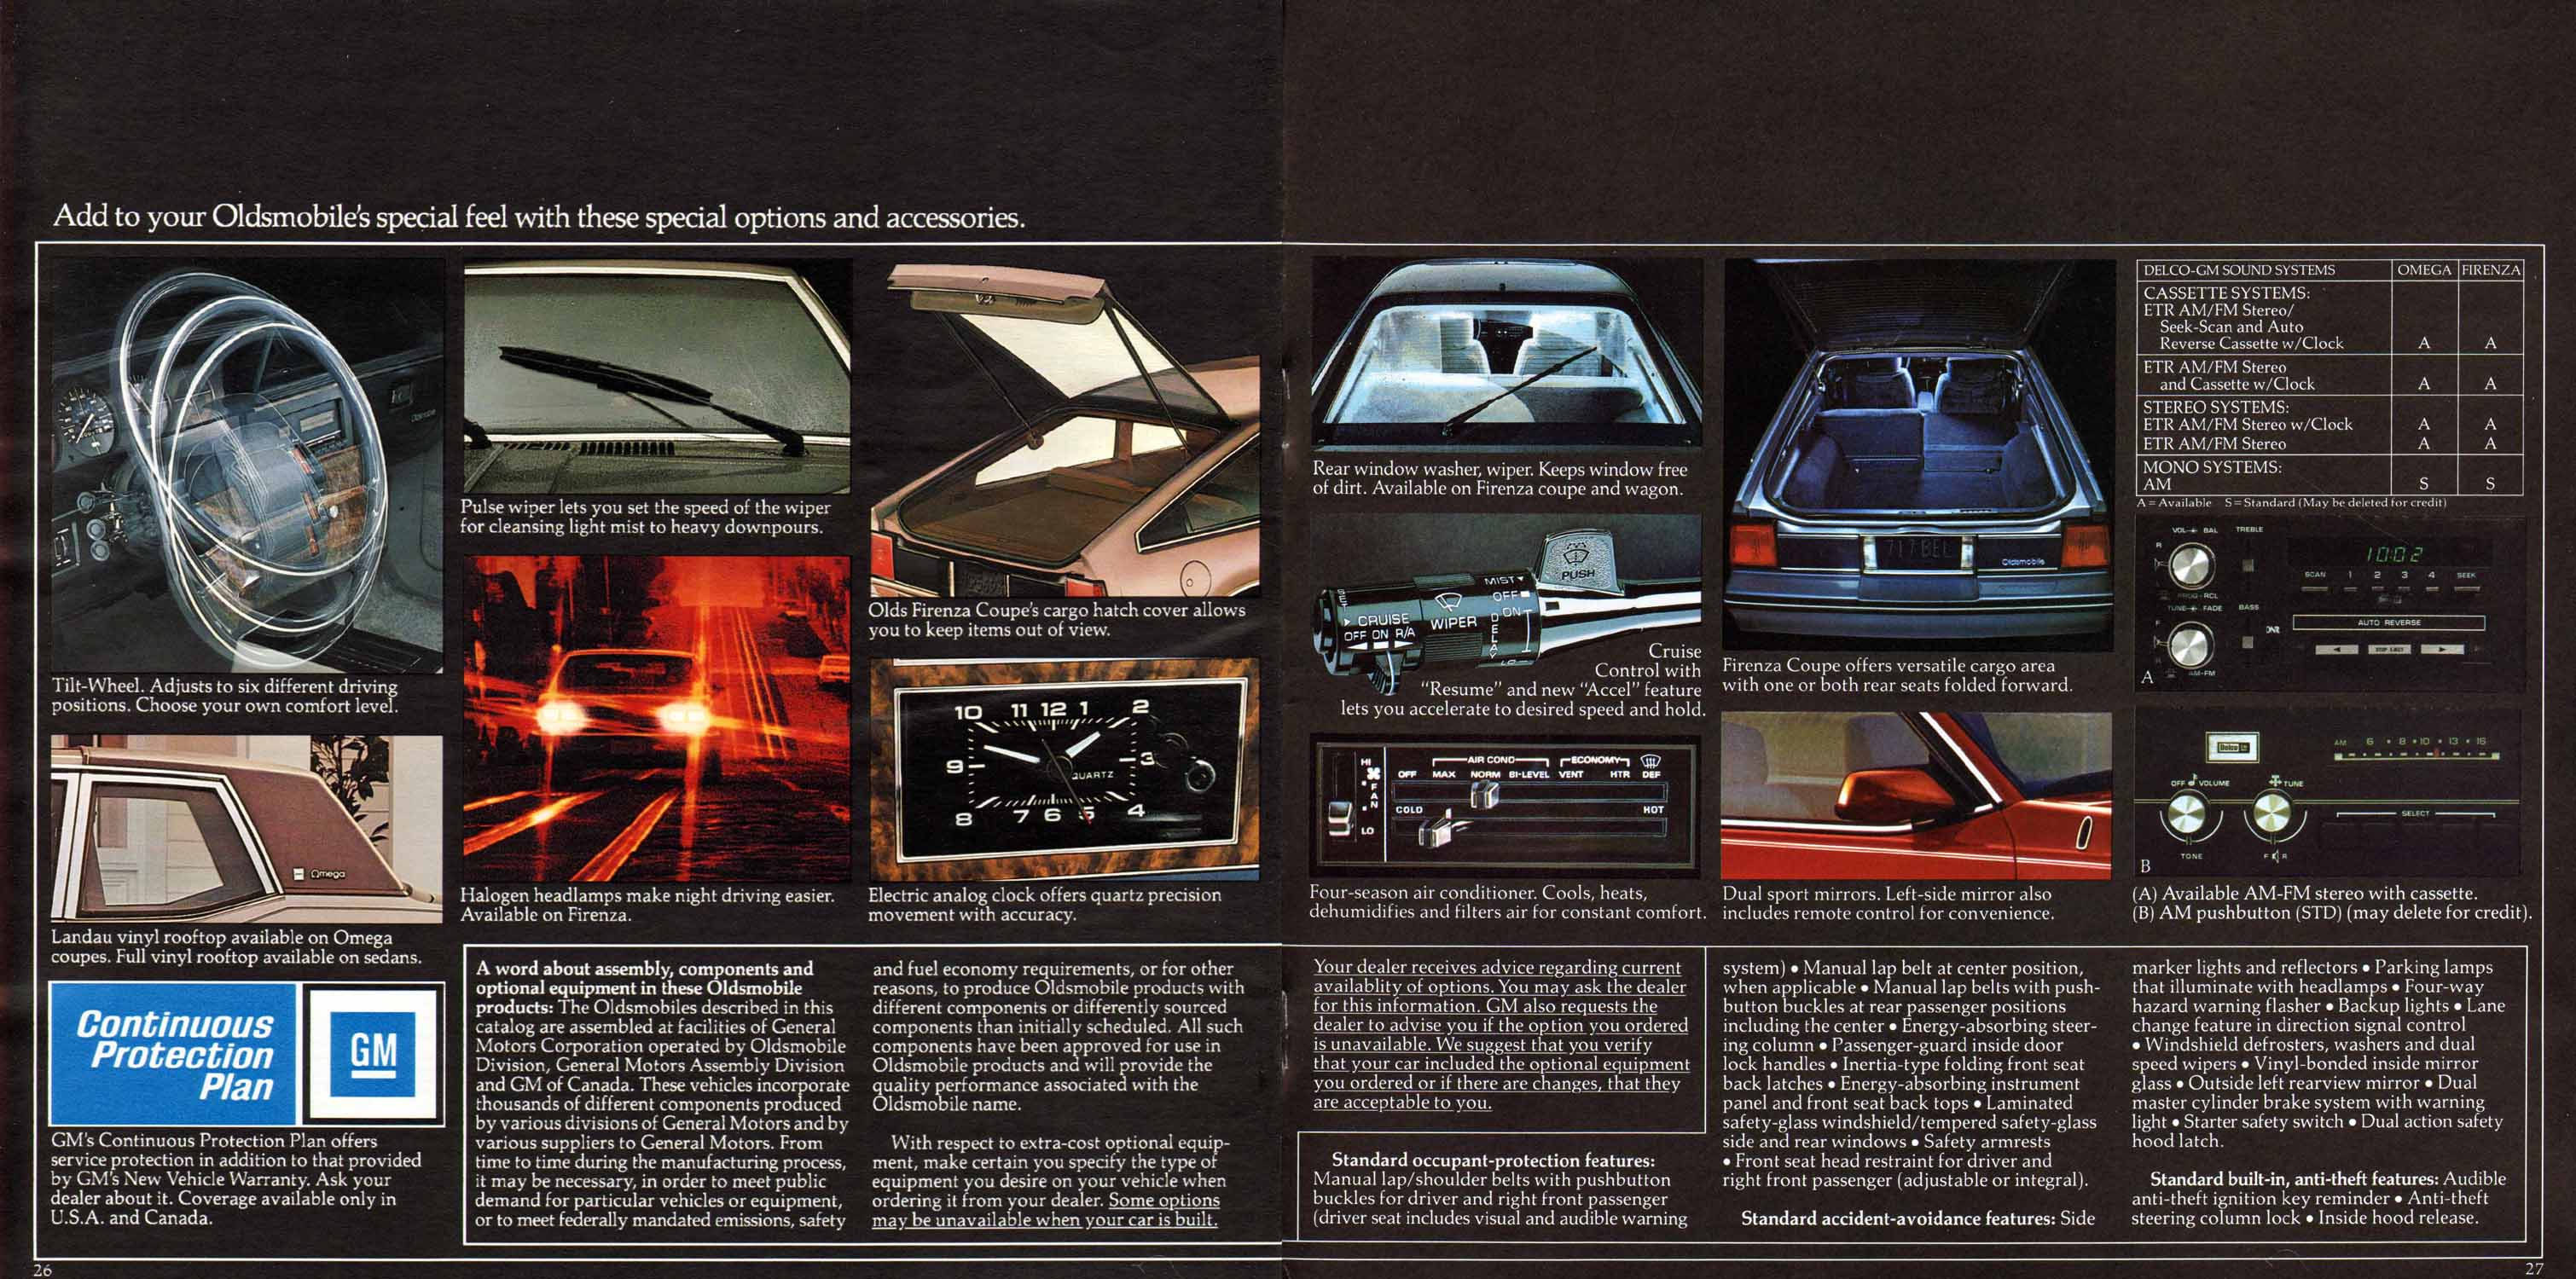 1984_Oldsmobile_Small_Size-26-27